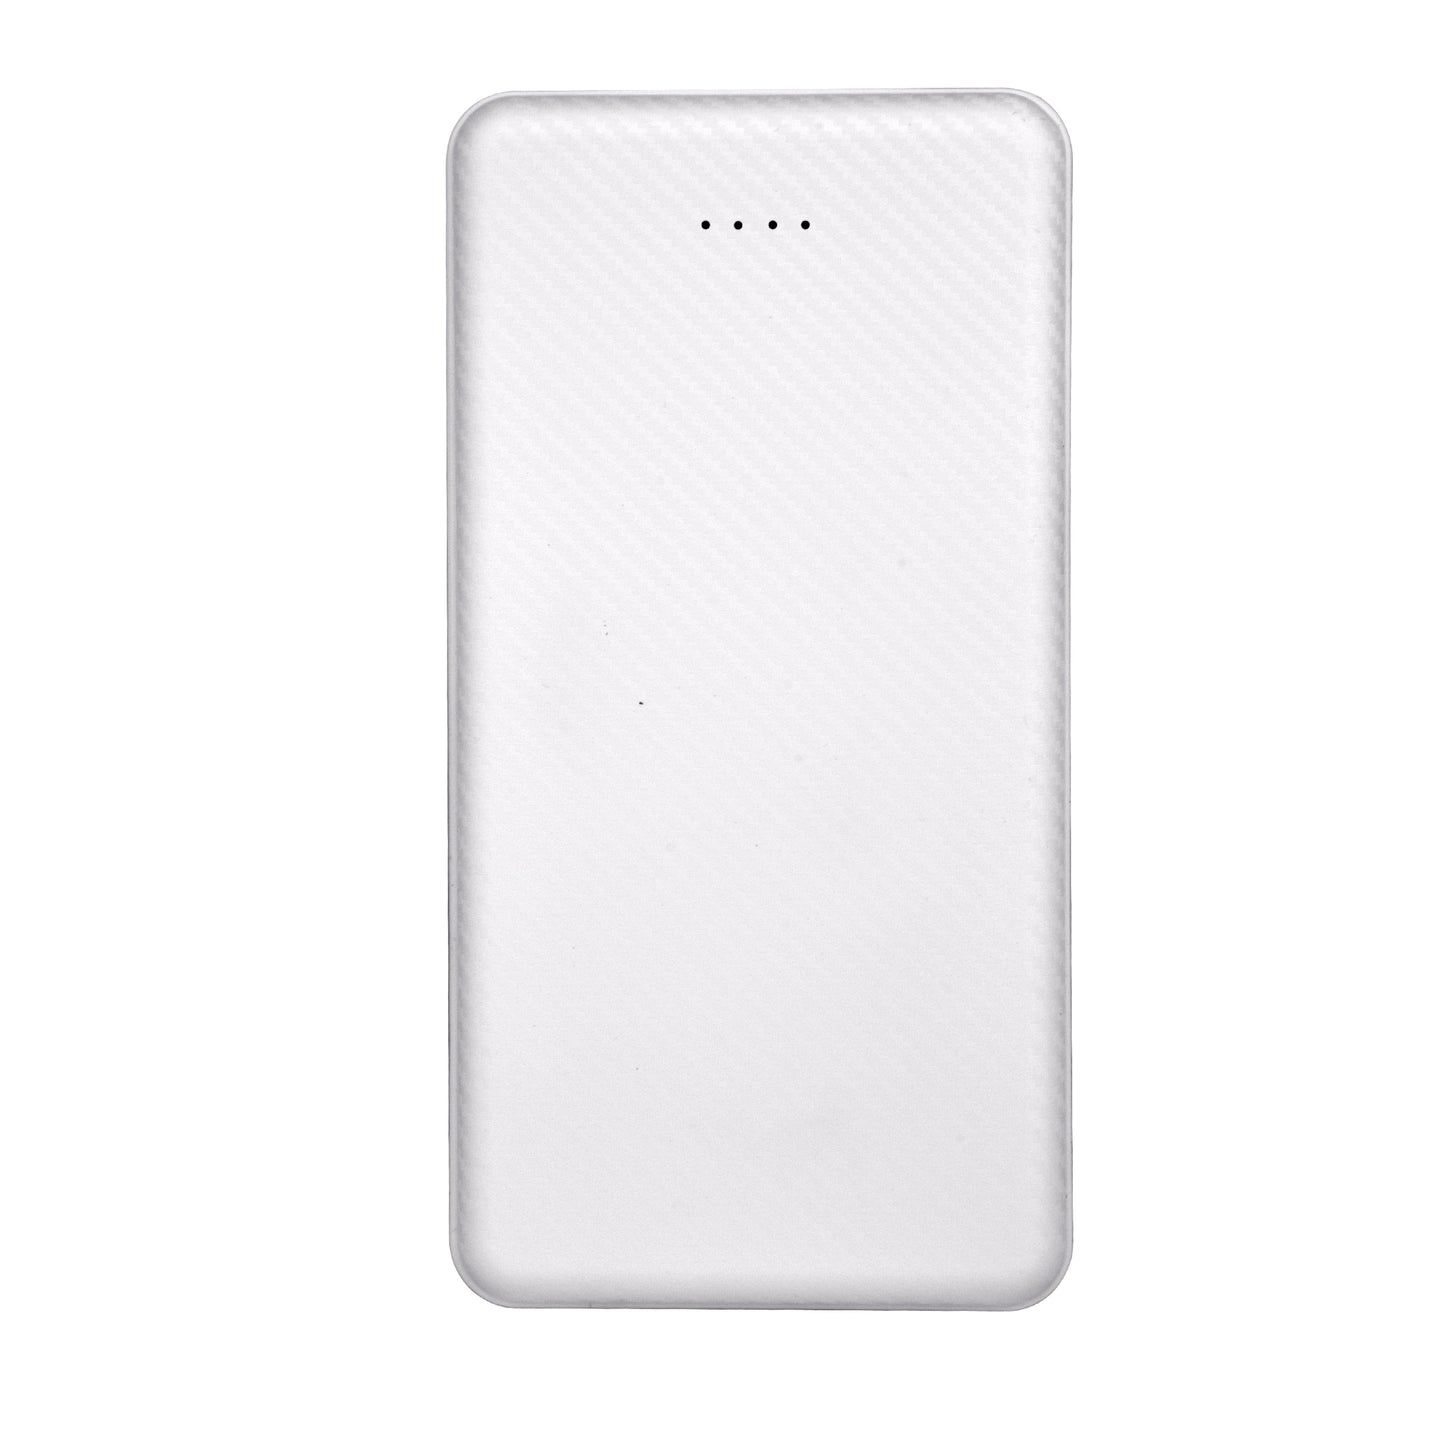 Personalized White 10000mAh Power Bank - For Corporate Gifting, Event Gifting, Freebies, Promotions - EnZest HK1216